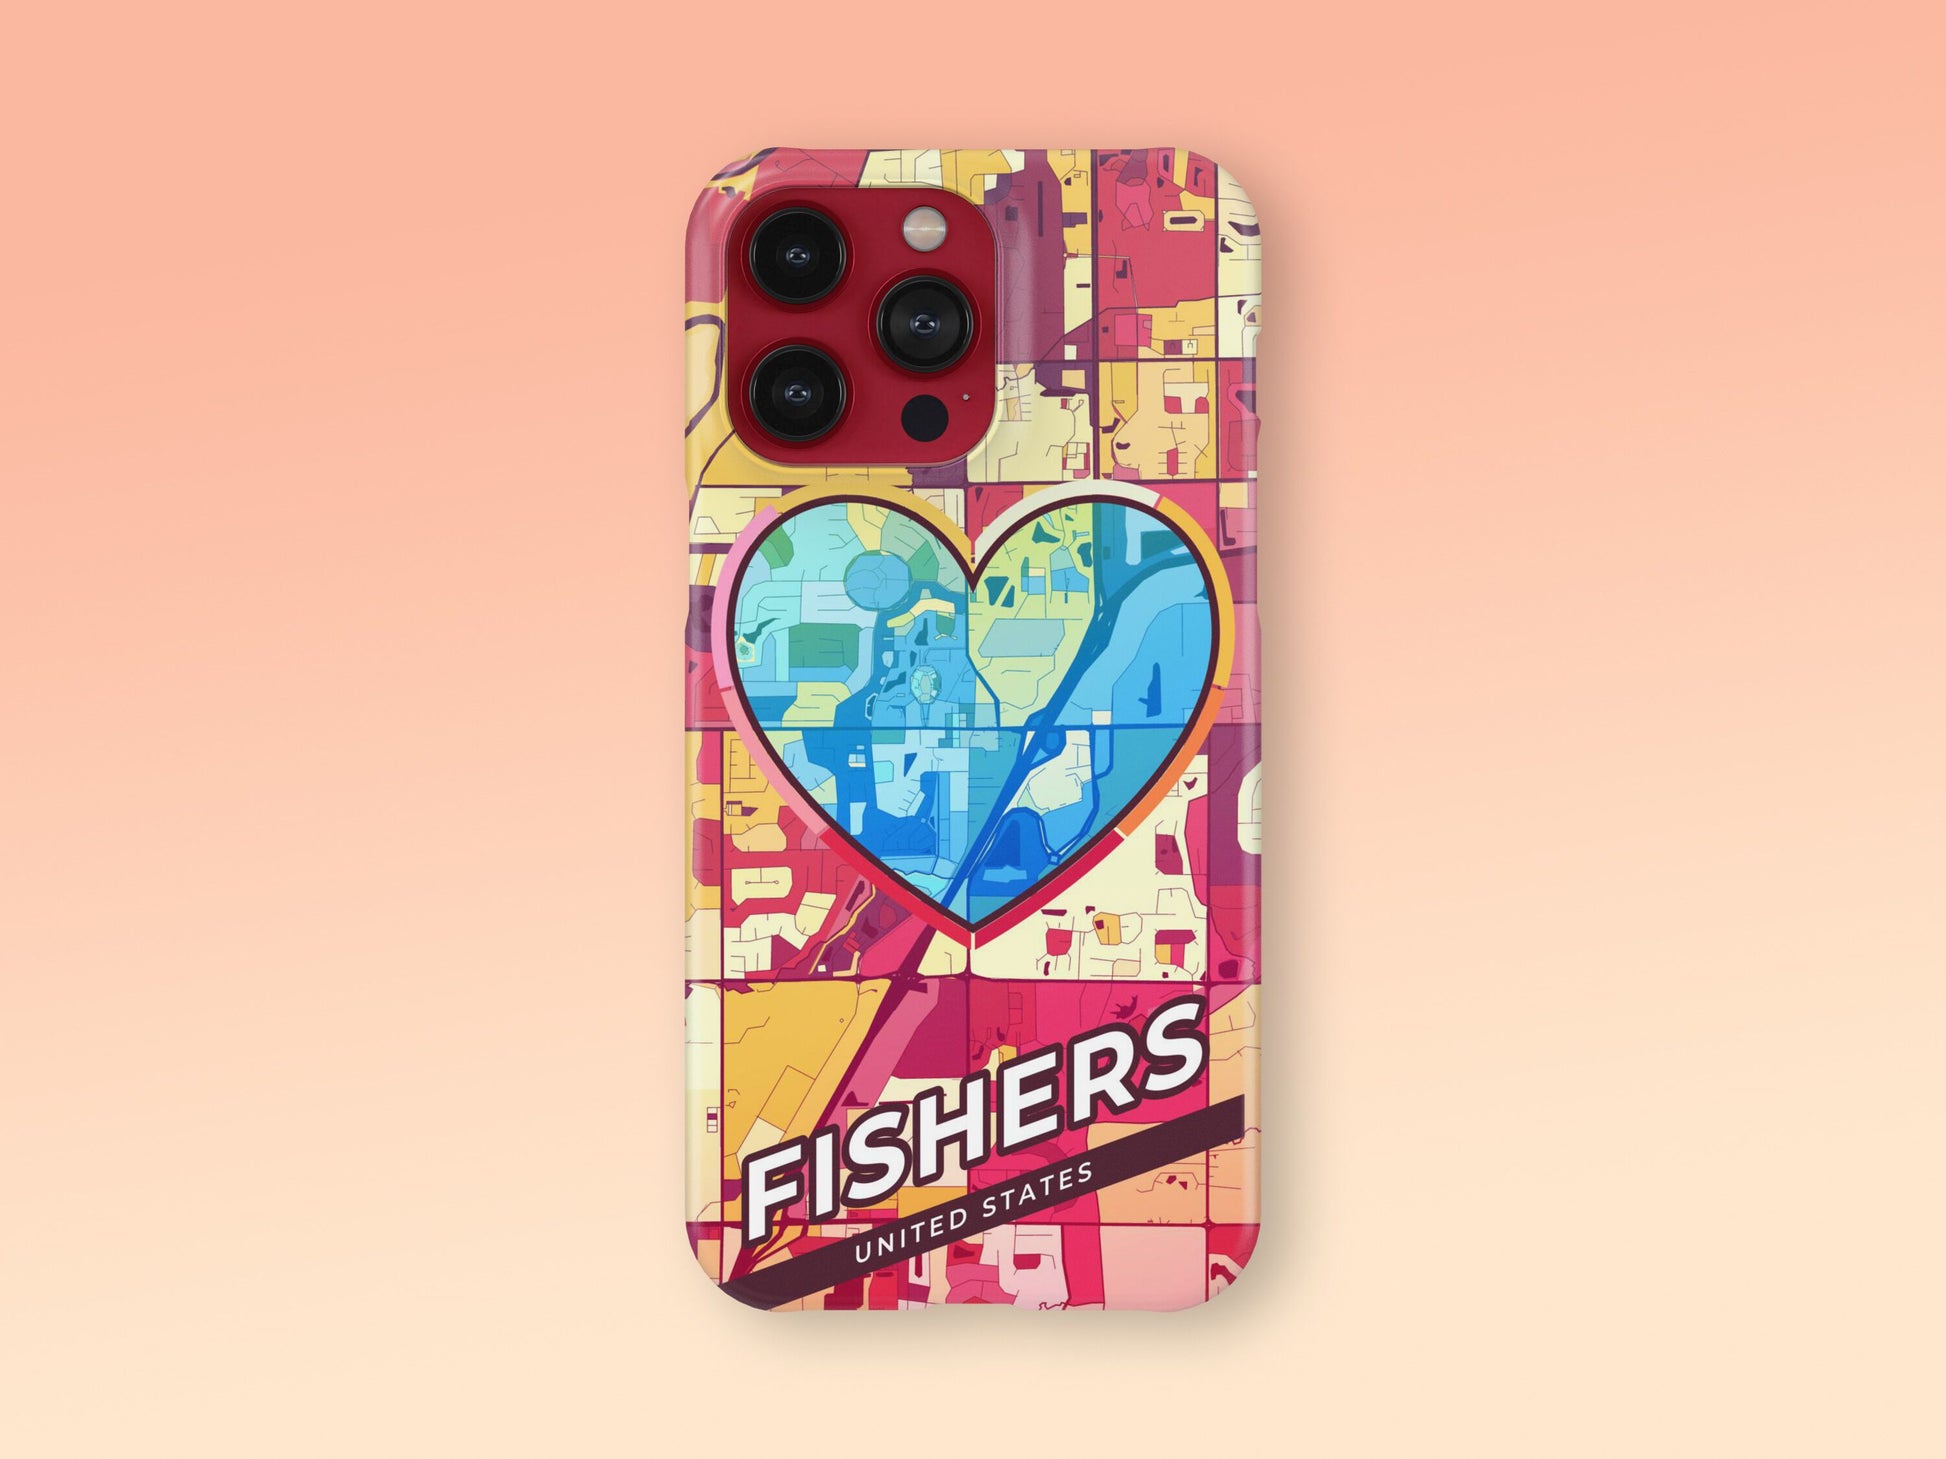 Fishers Indiana slim phone case with colorful icon. Birthday, wedding or housewarming gift. Couple match cases. 2